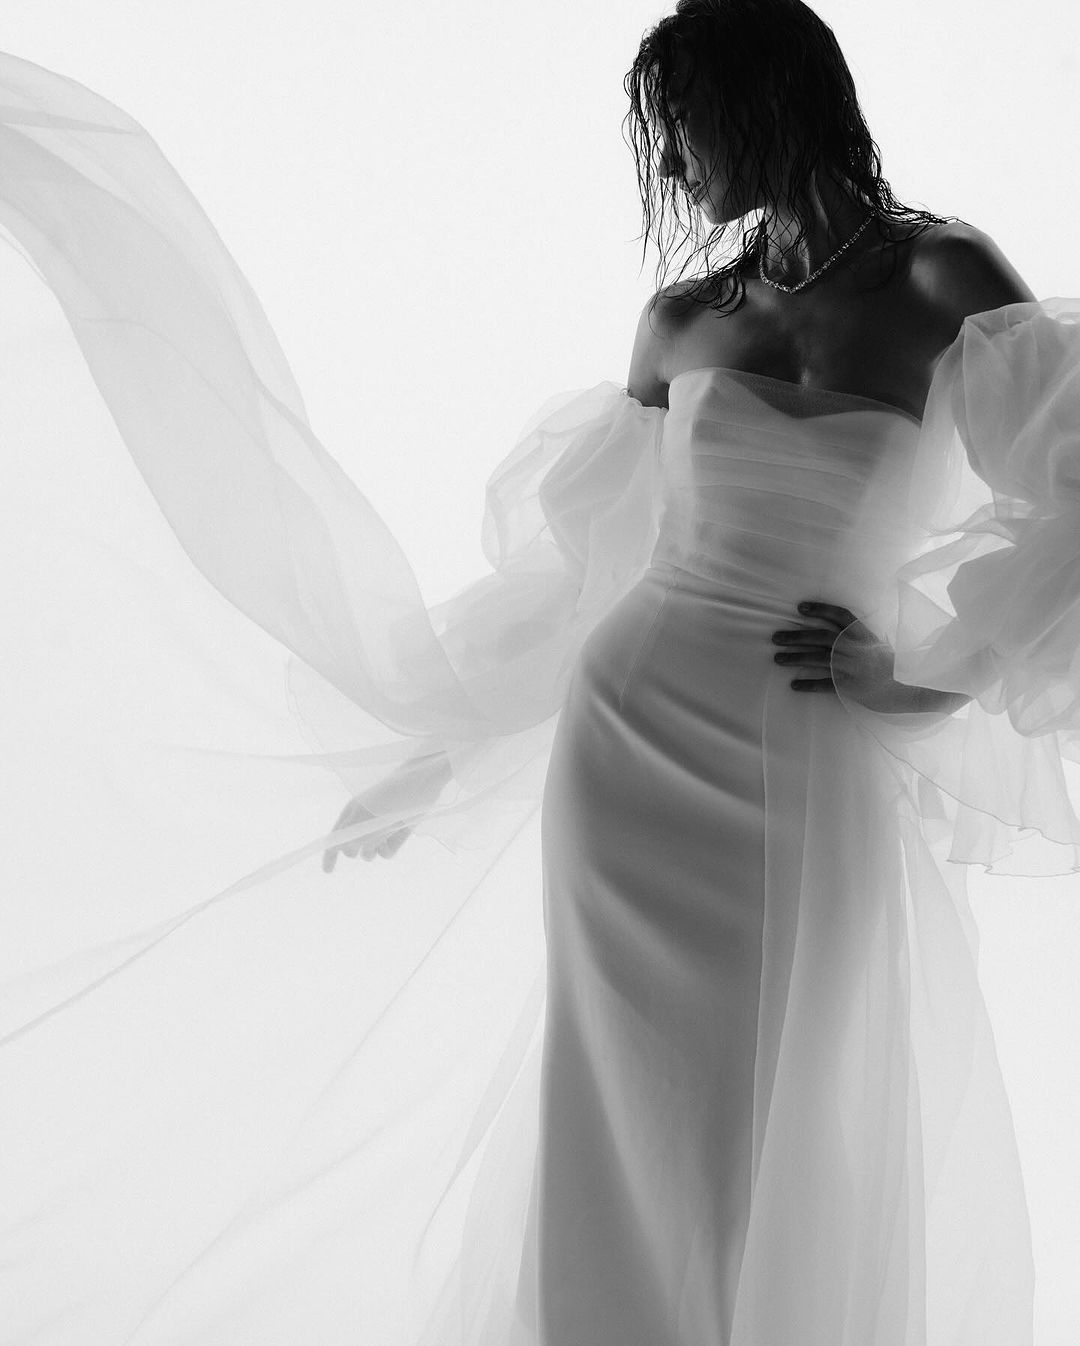 View the Official NYFW Bridal April 2022 Schedule, News